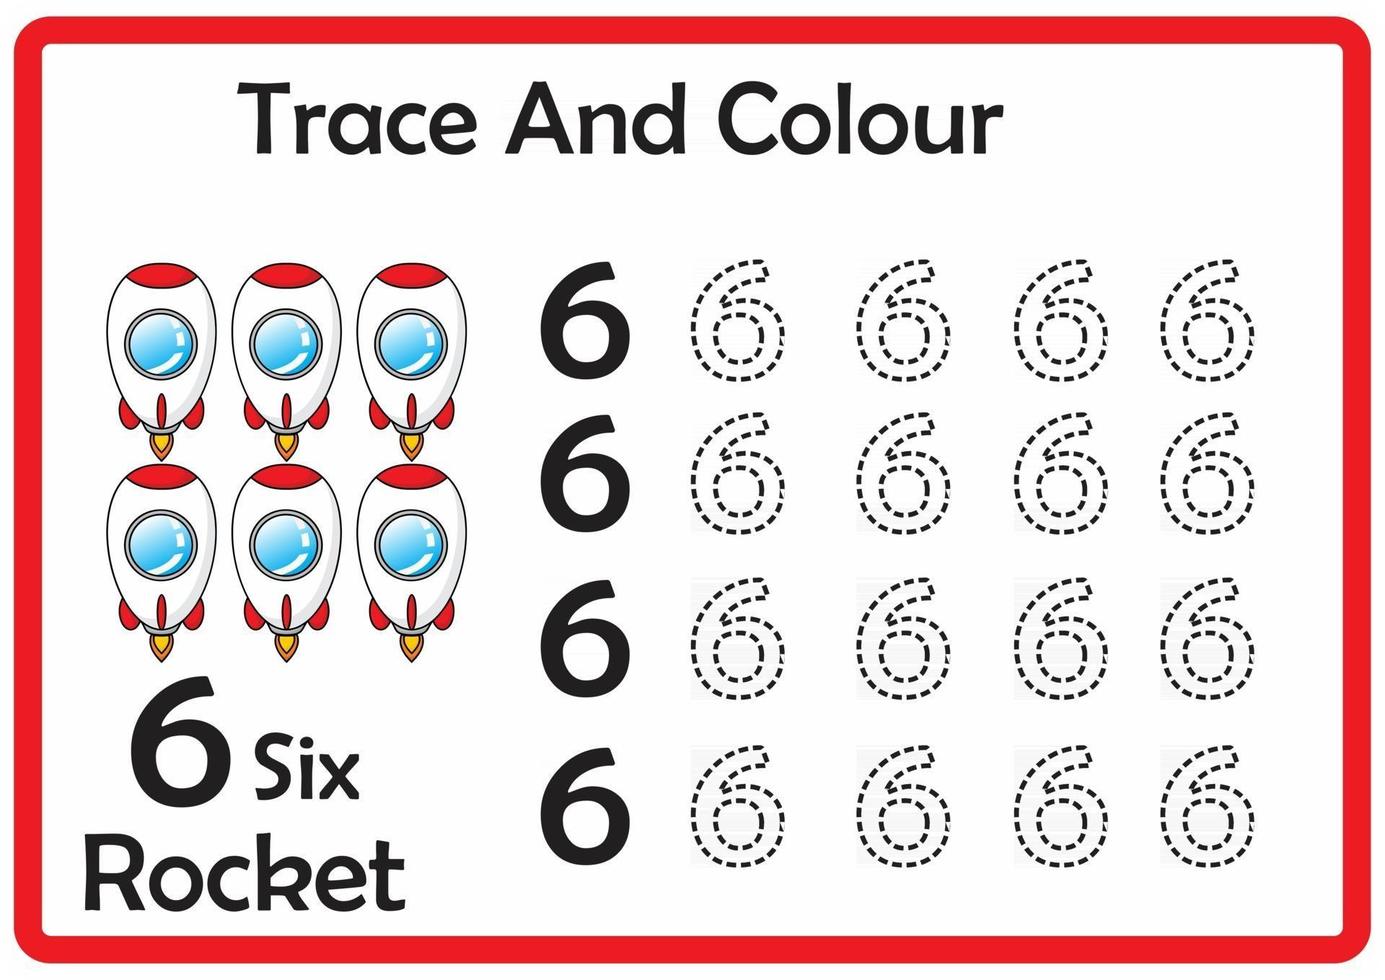 trace and colour rocket number 6 vector